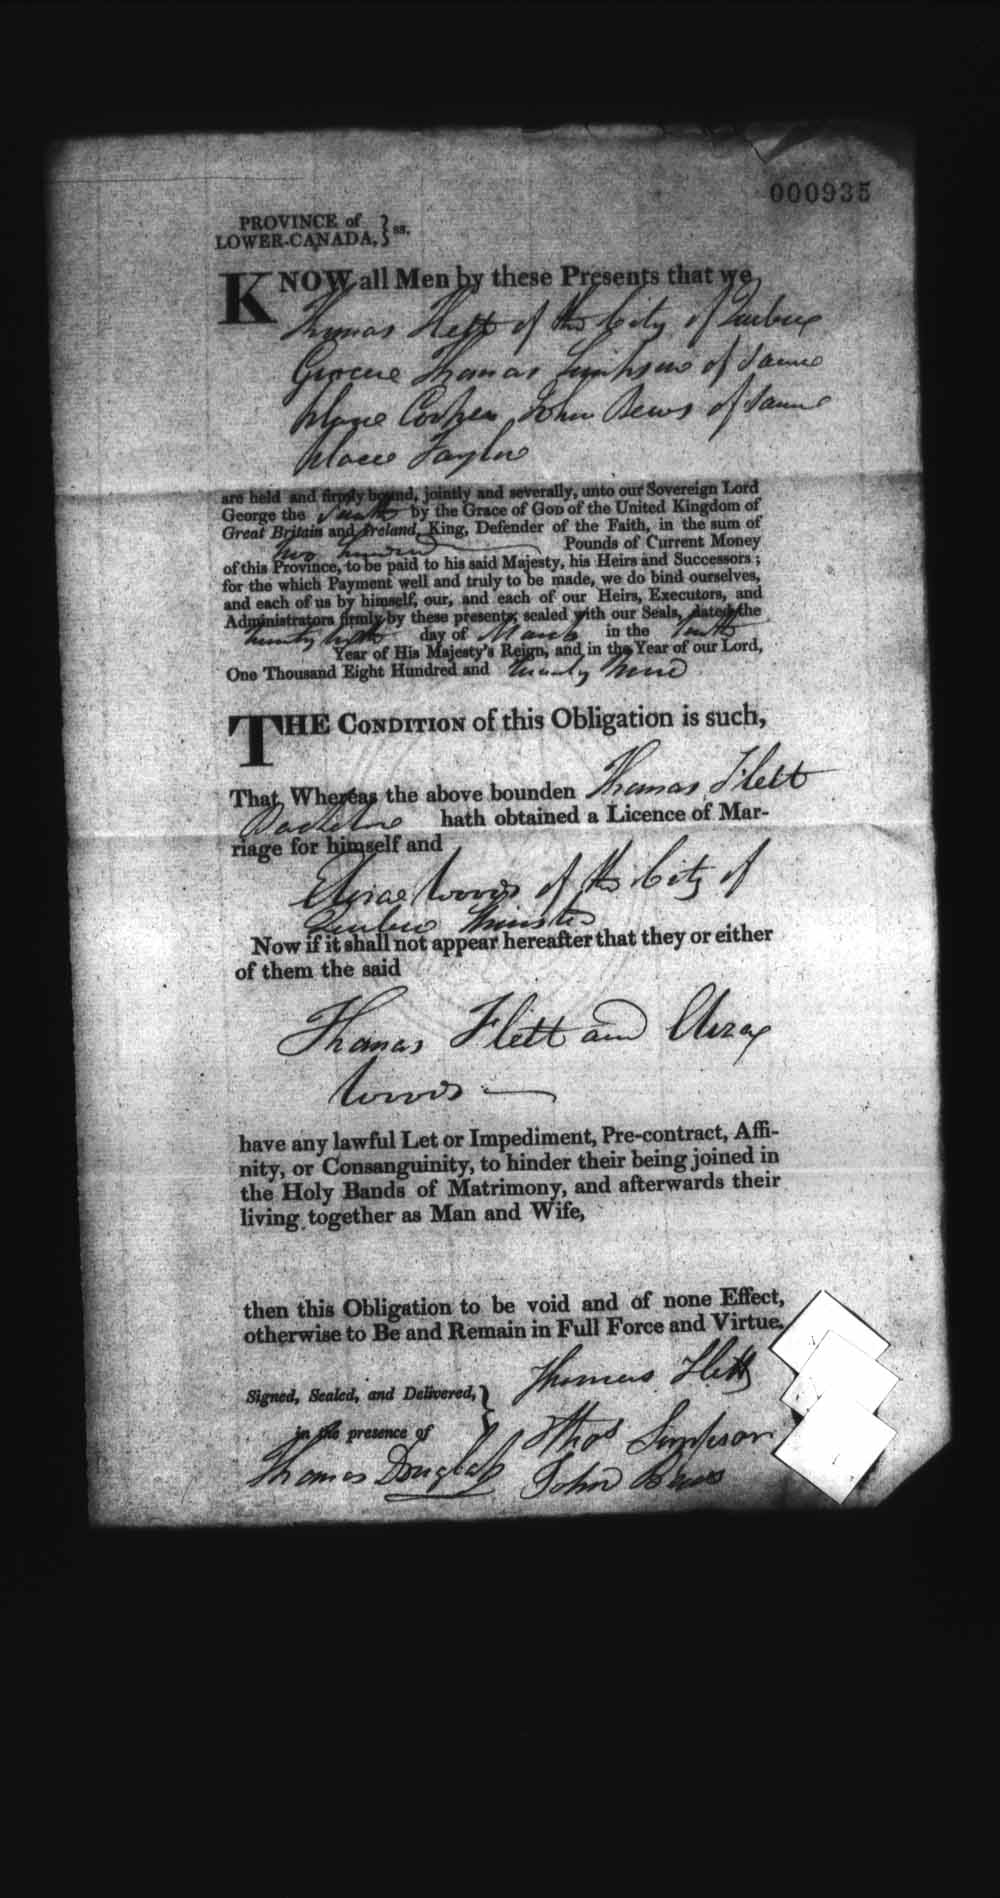 Digitized page of Upper and Lower Canada Marriage Bonds (1779-1865) for Image No.: e008237039